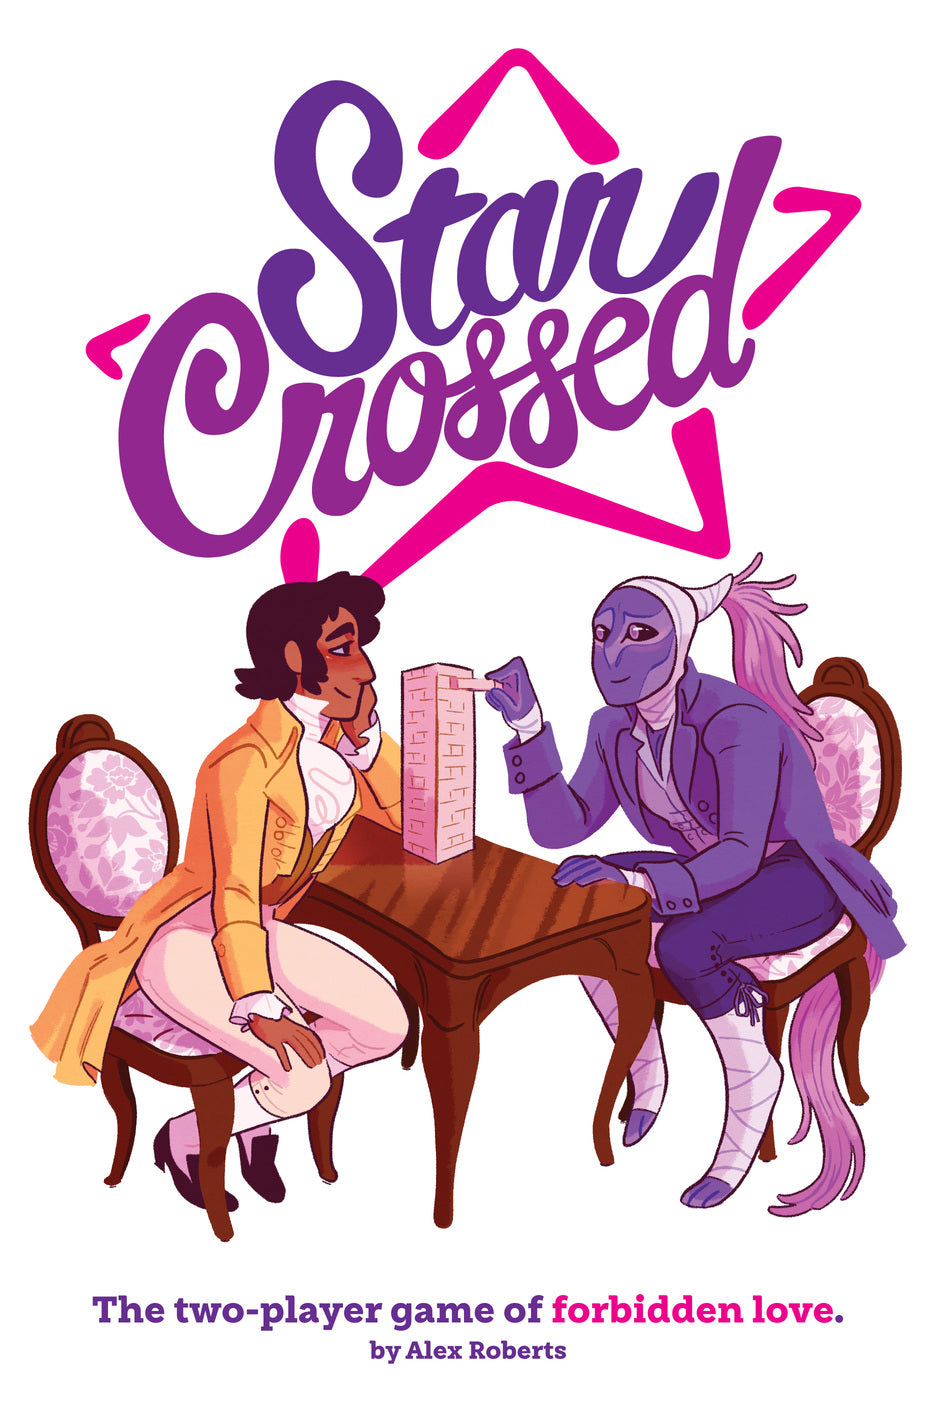 Star Crossed - Bards & Cards